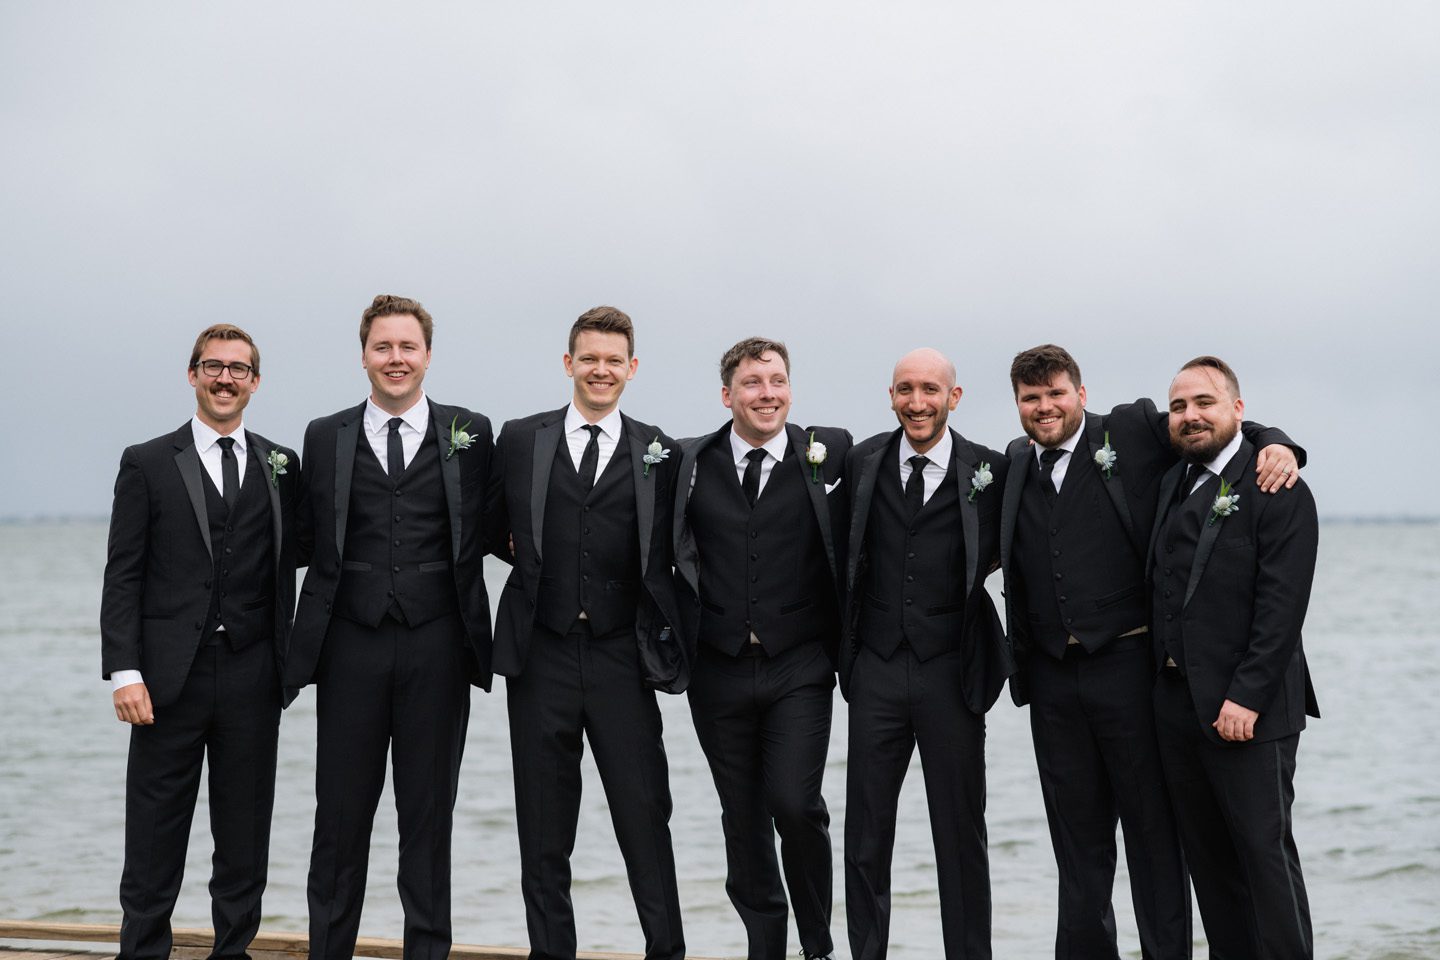 Groom and groomsmen at Festival Park in Manteo